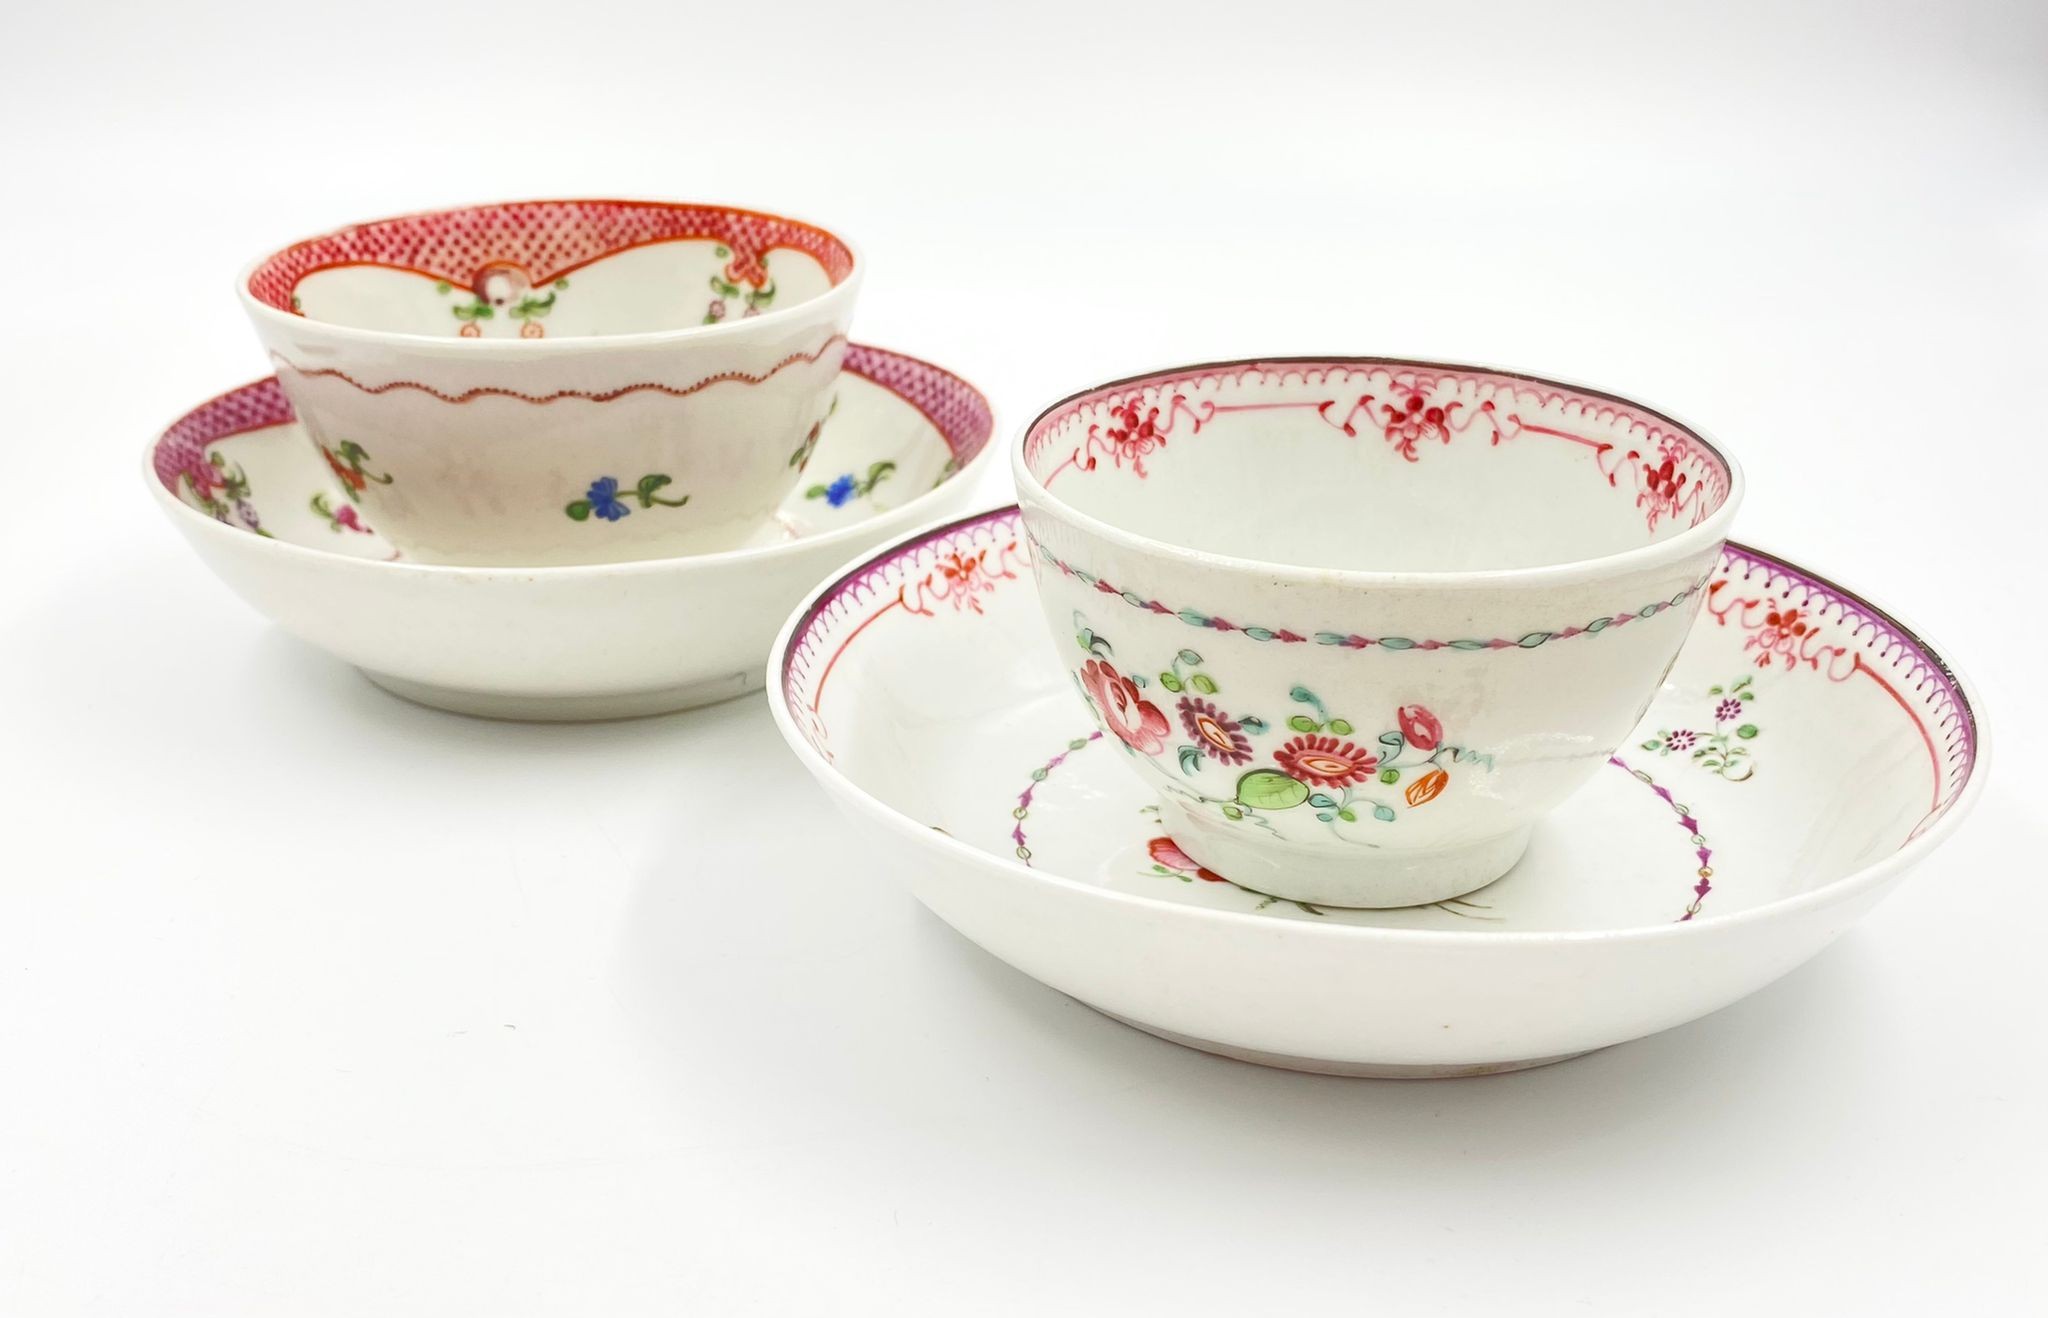 Two Antique New Hall Floral Tea bowls and Saucers. Pattern 173, circa 1790 and Pattern 353, circa - Image 7 of 10